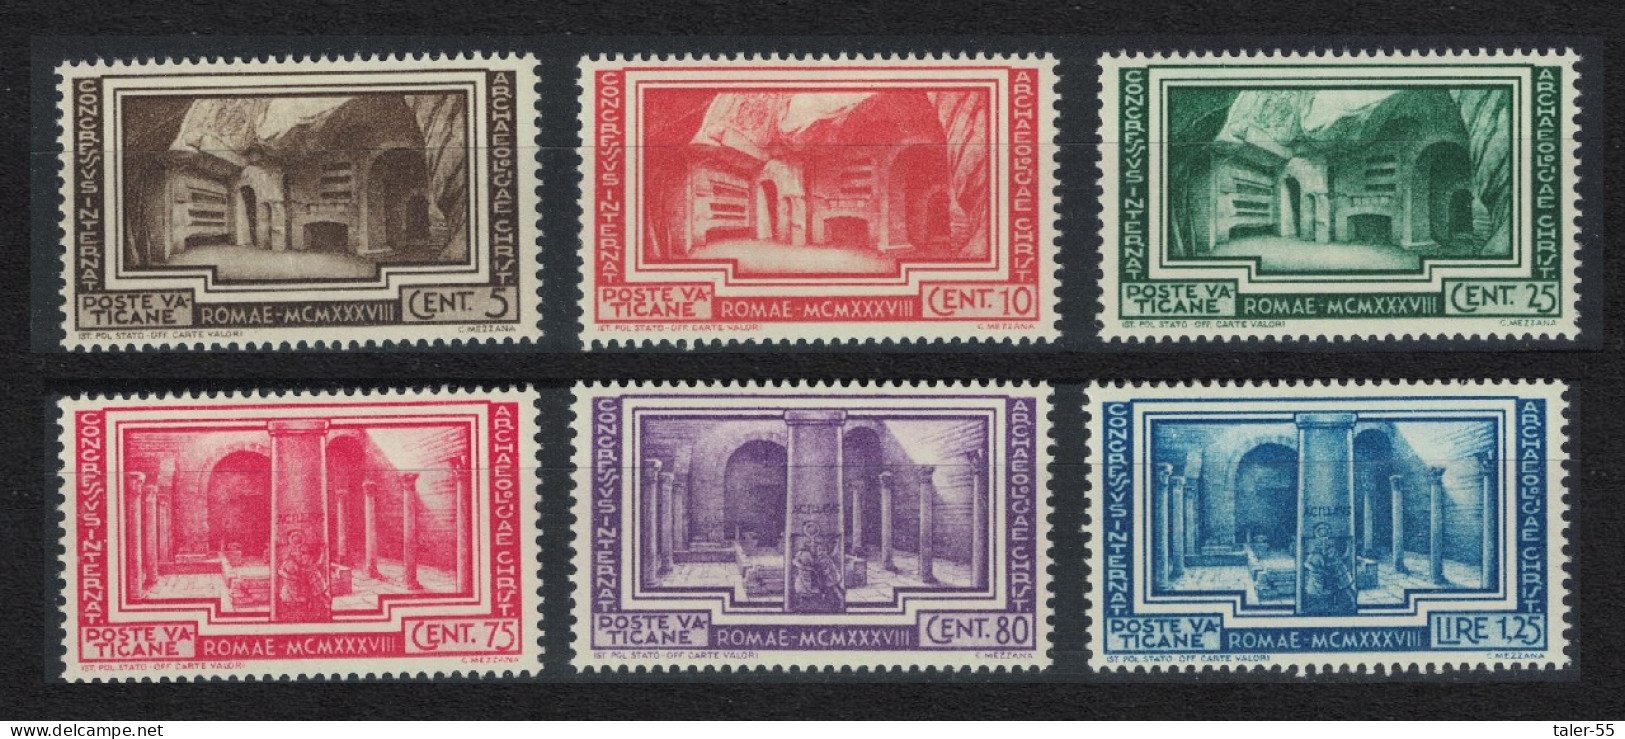 Vatican International Christian Archaeological Congress 6v 1938 MH SG#63-68 - Unused Stamps